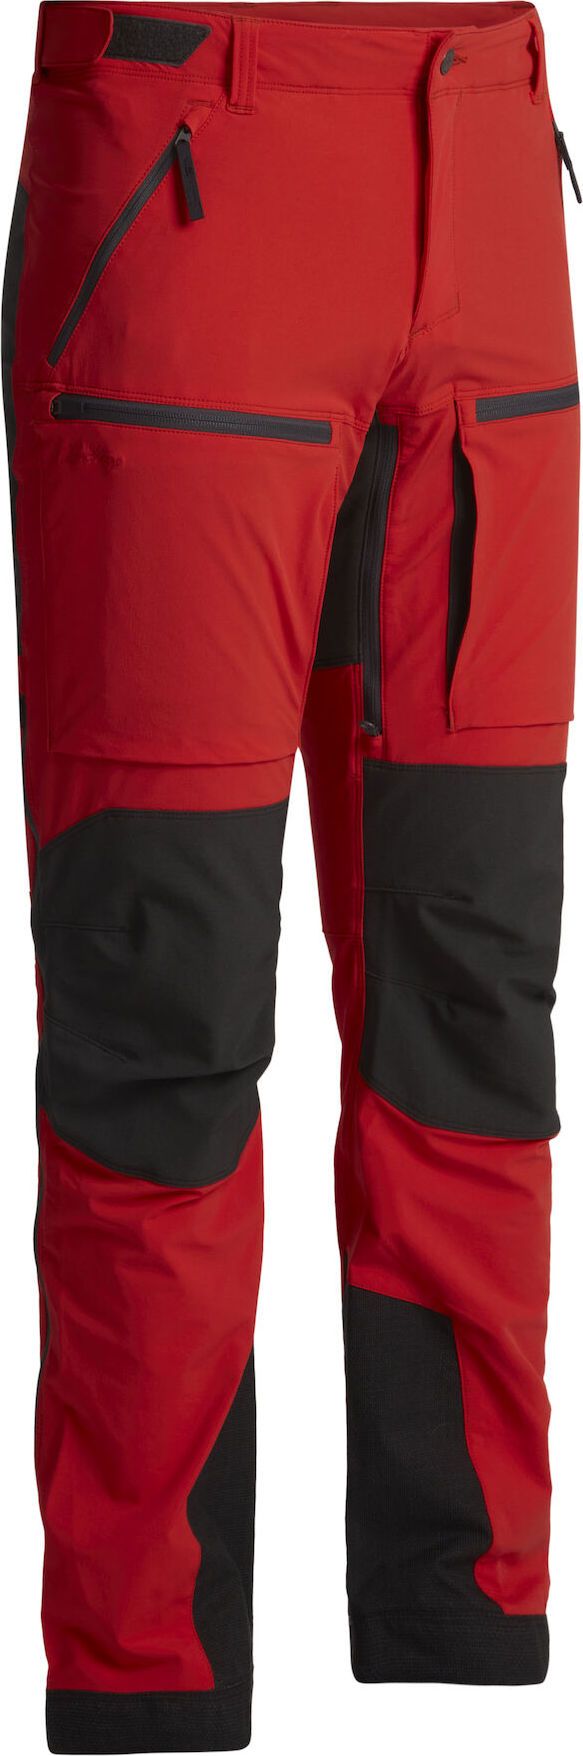 Men's Askro Pro Pant Lively Red/Charcoal Lundhags